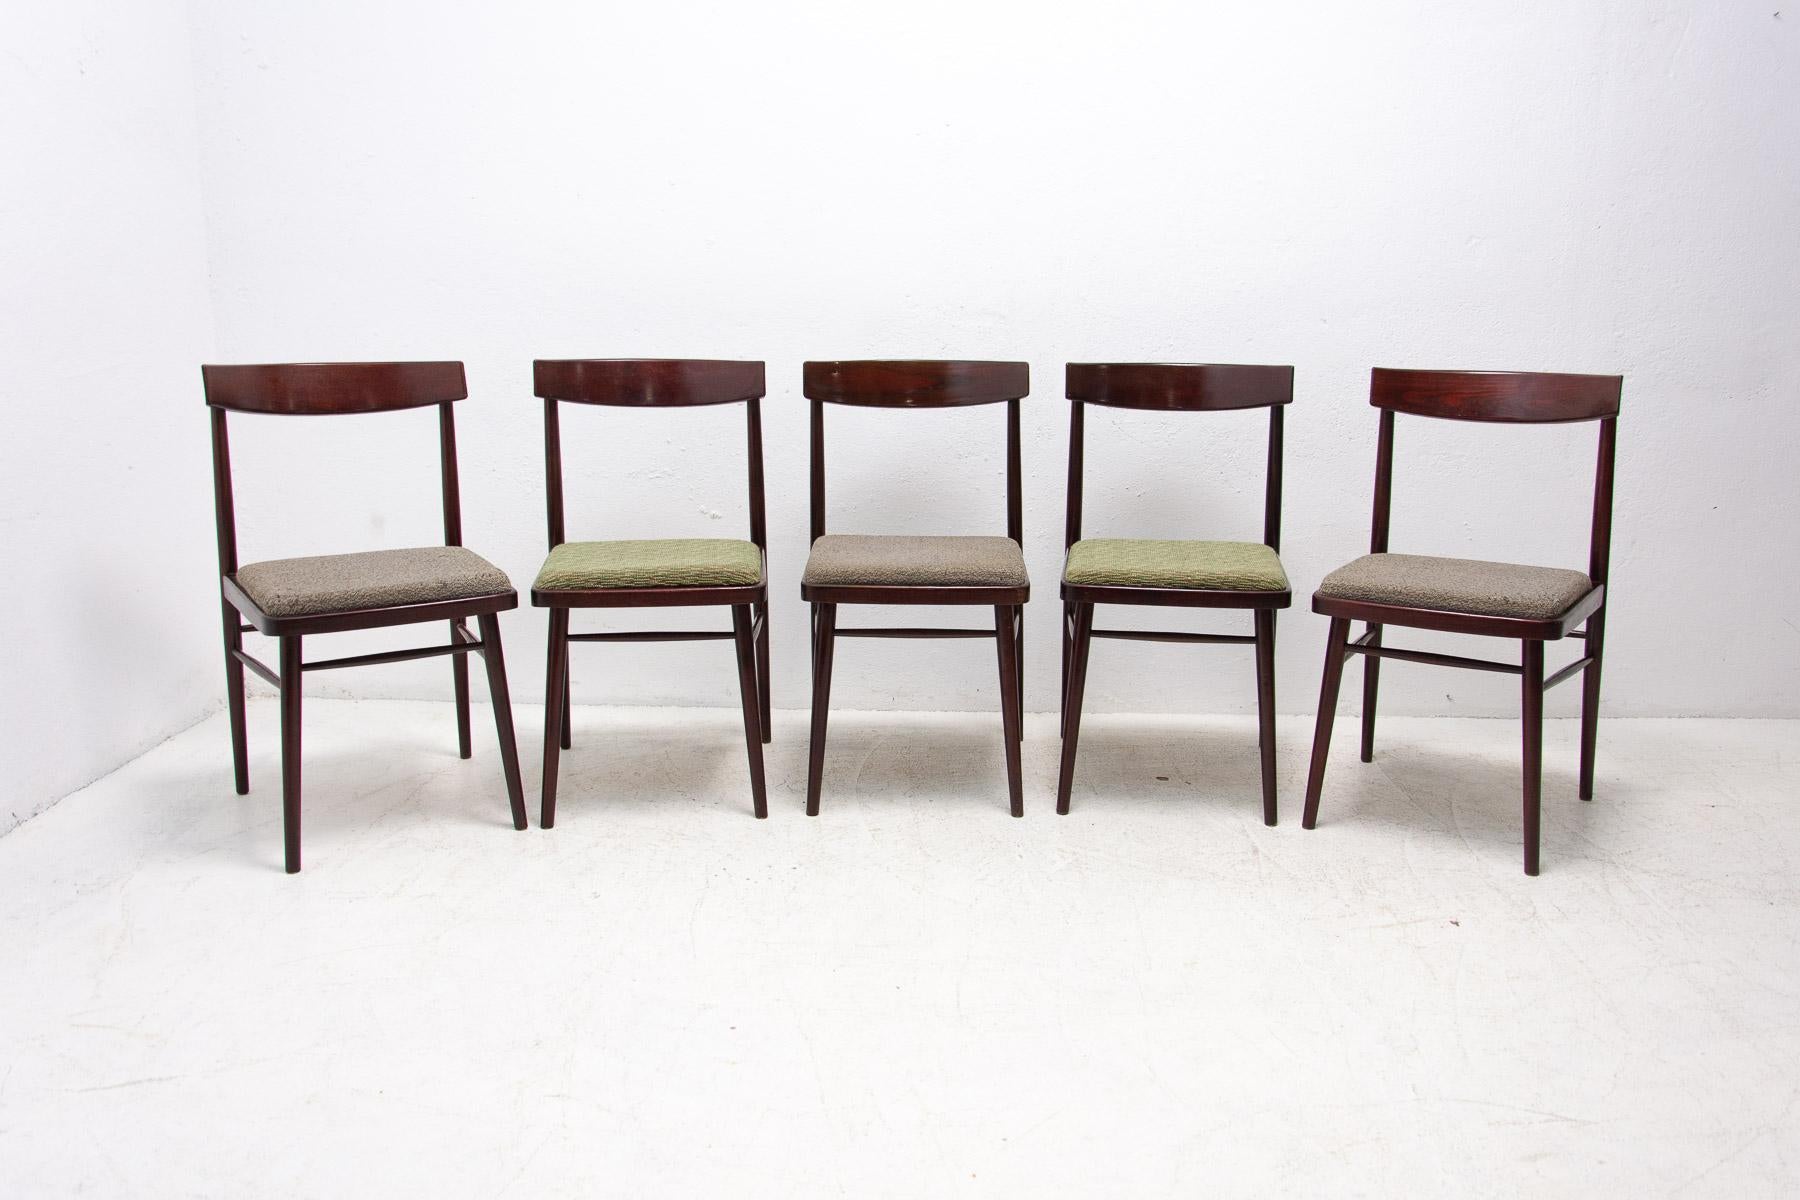 These upholstered dining chairs were made in the former Czechoslovakia by TON company in the 1970´s.
This model of chairs was also to be produced by JITONA company.
These are in good Vintage condition, have a different fabric color. Mahogany